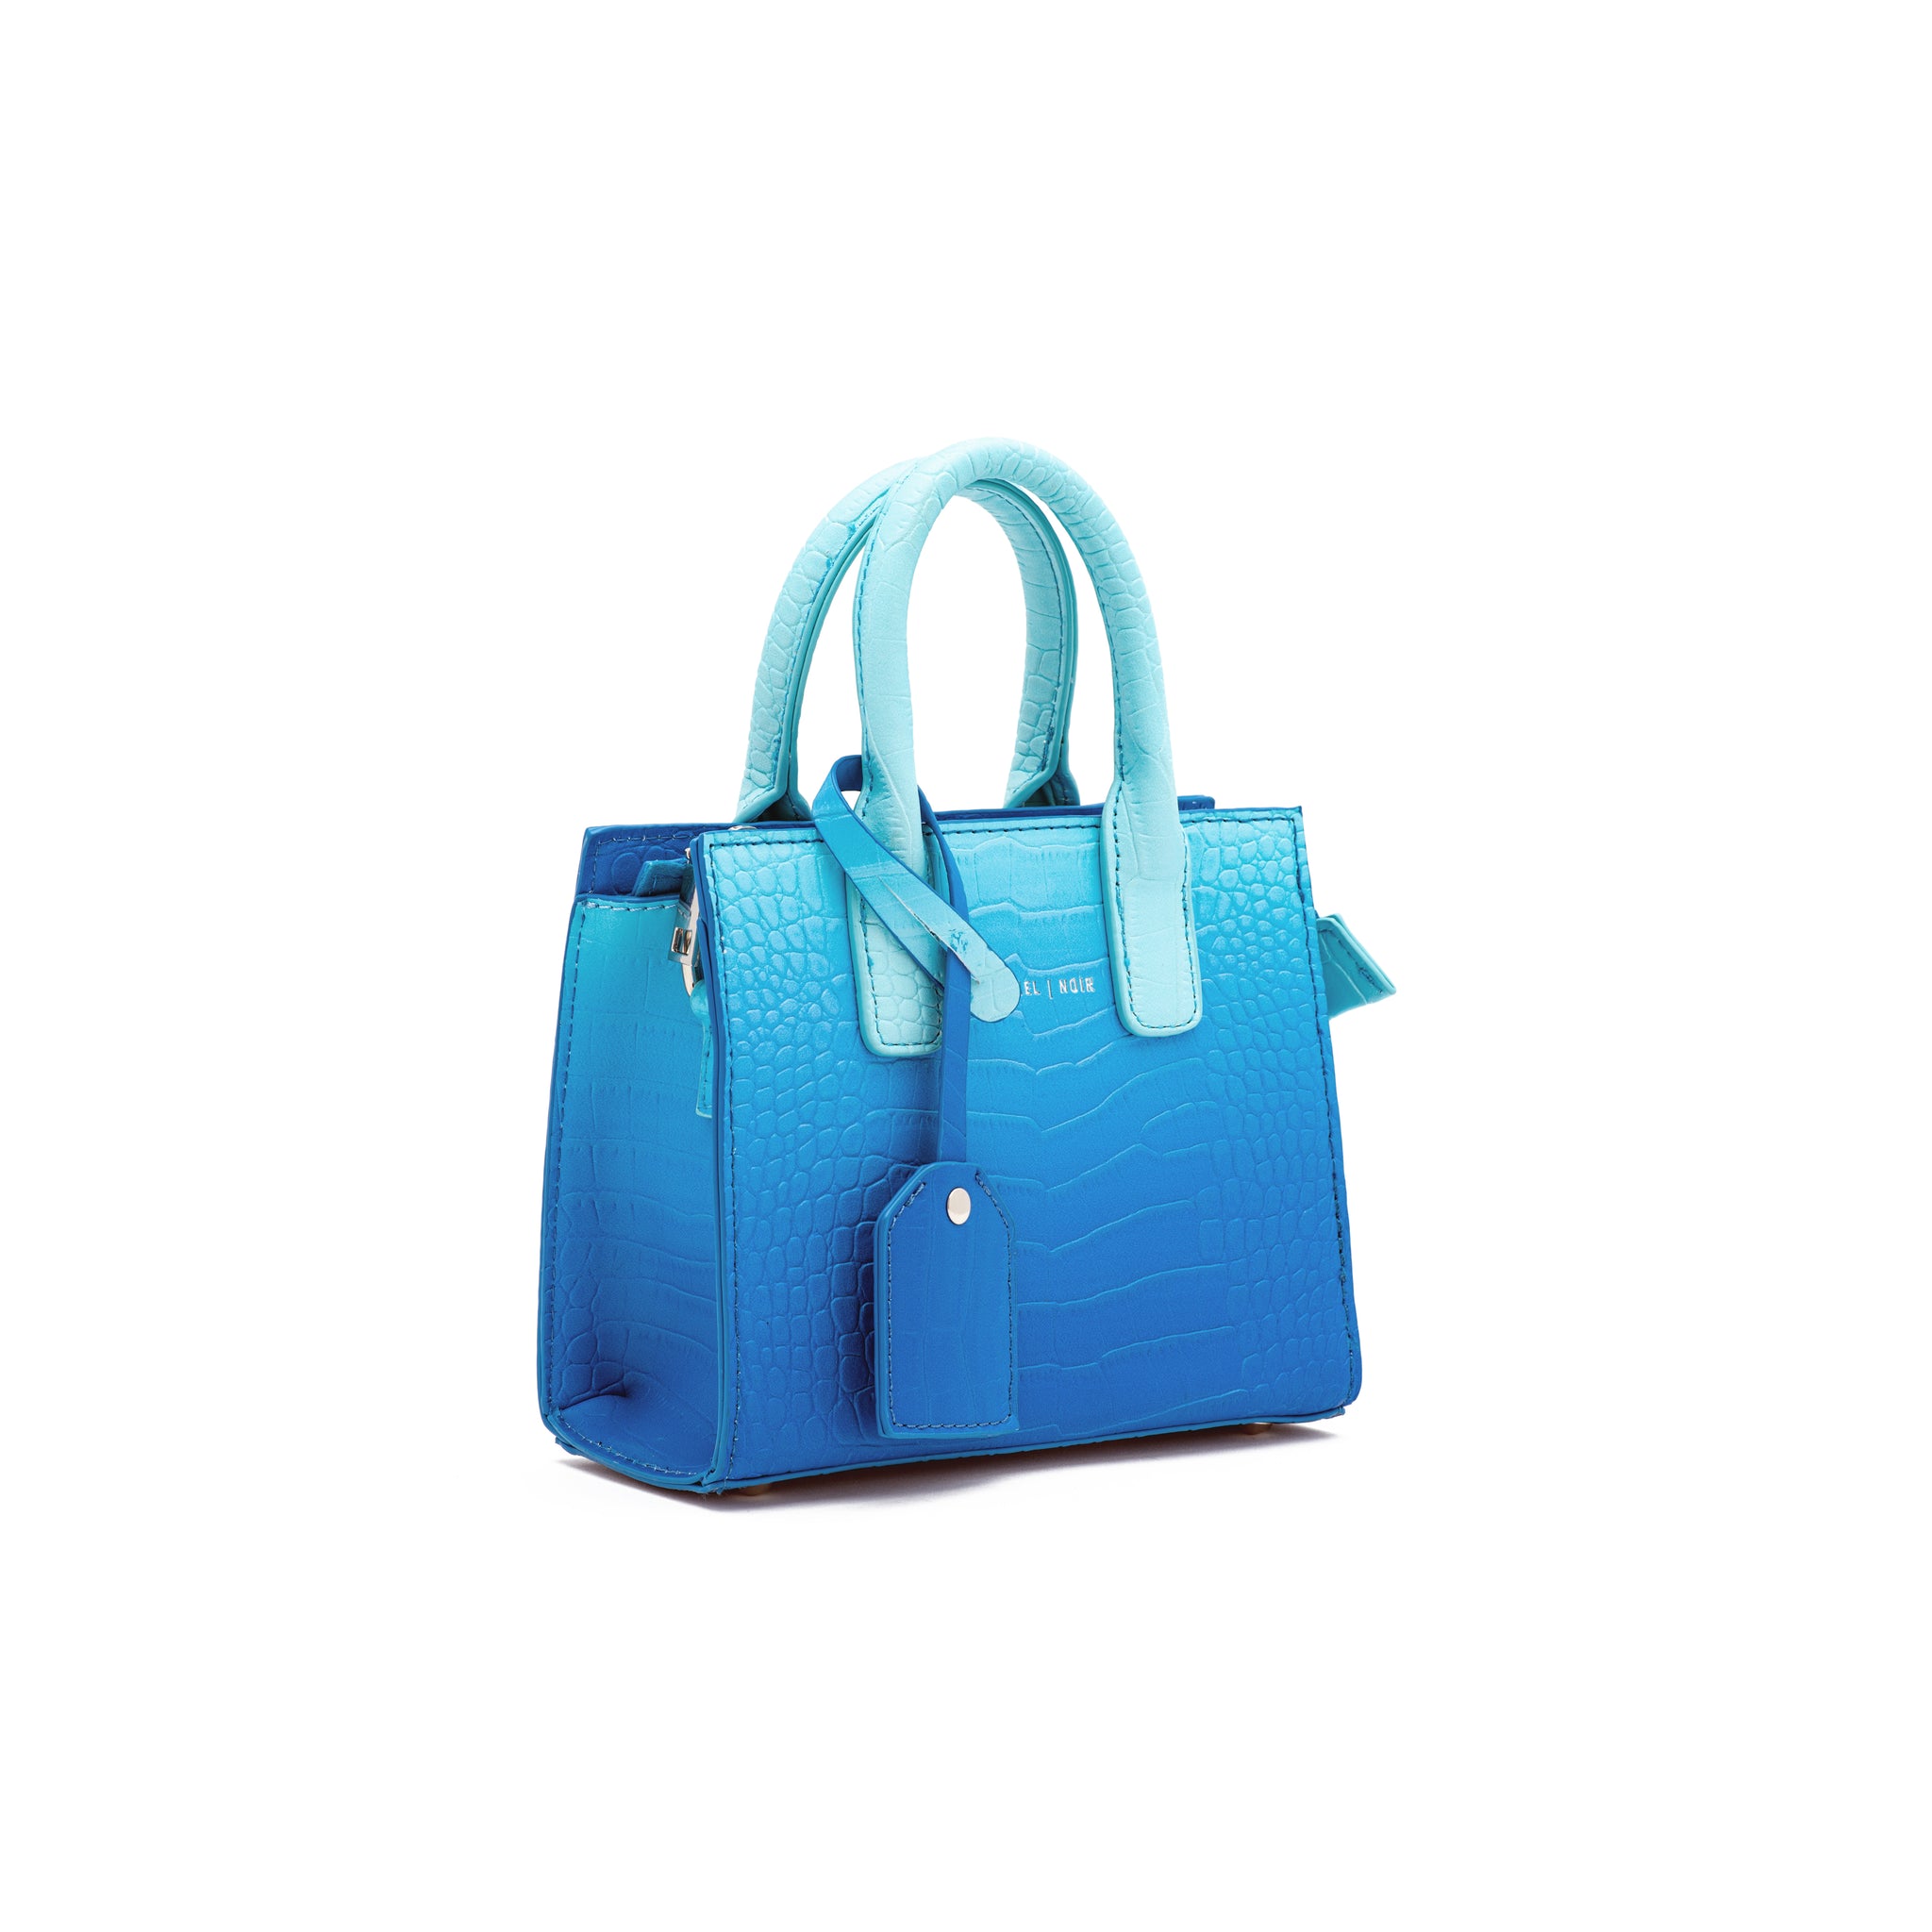 Ombre Croc Embossed Tote Bag